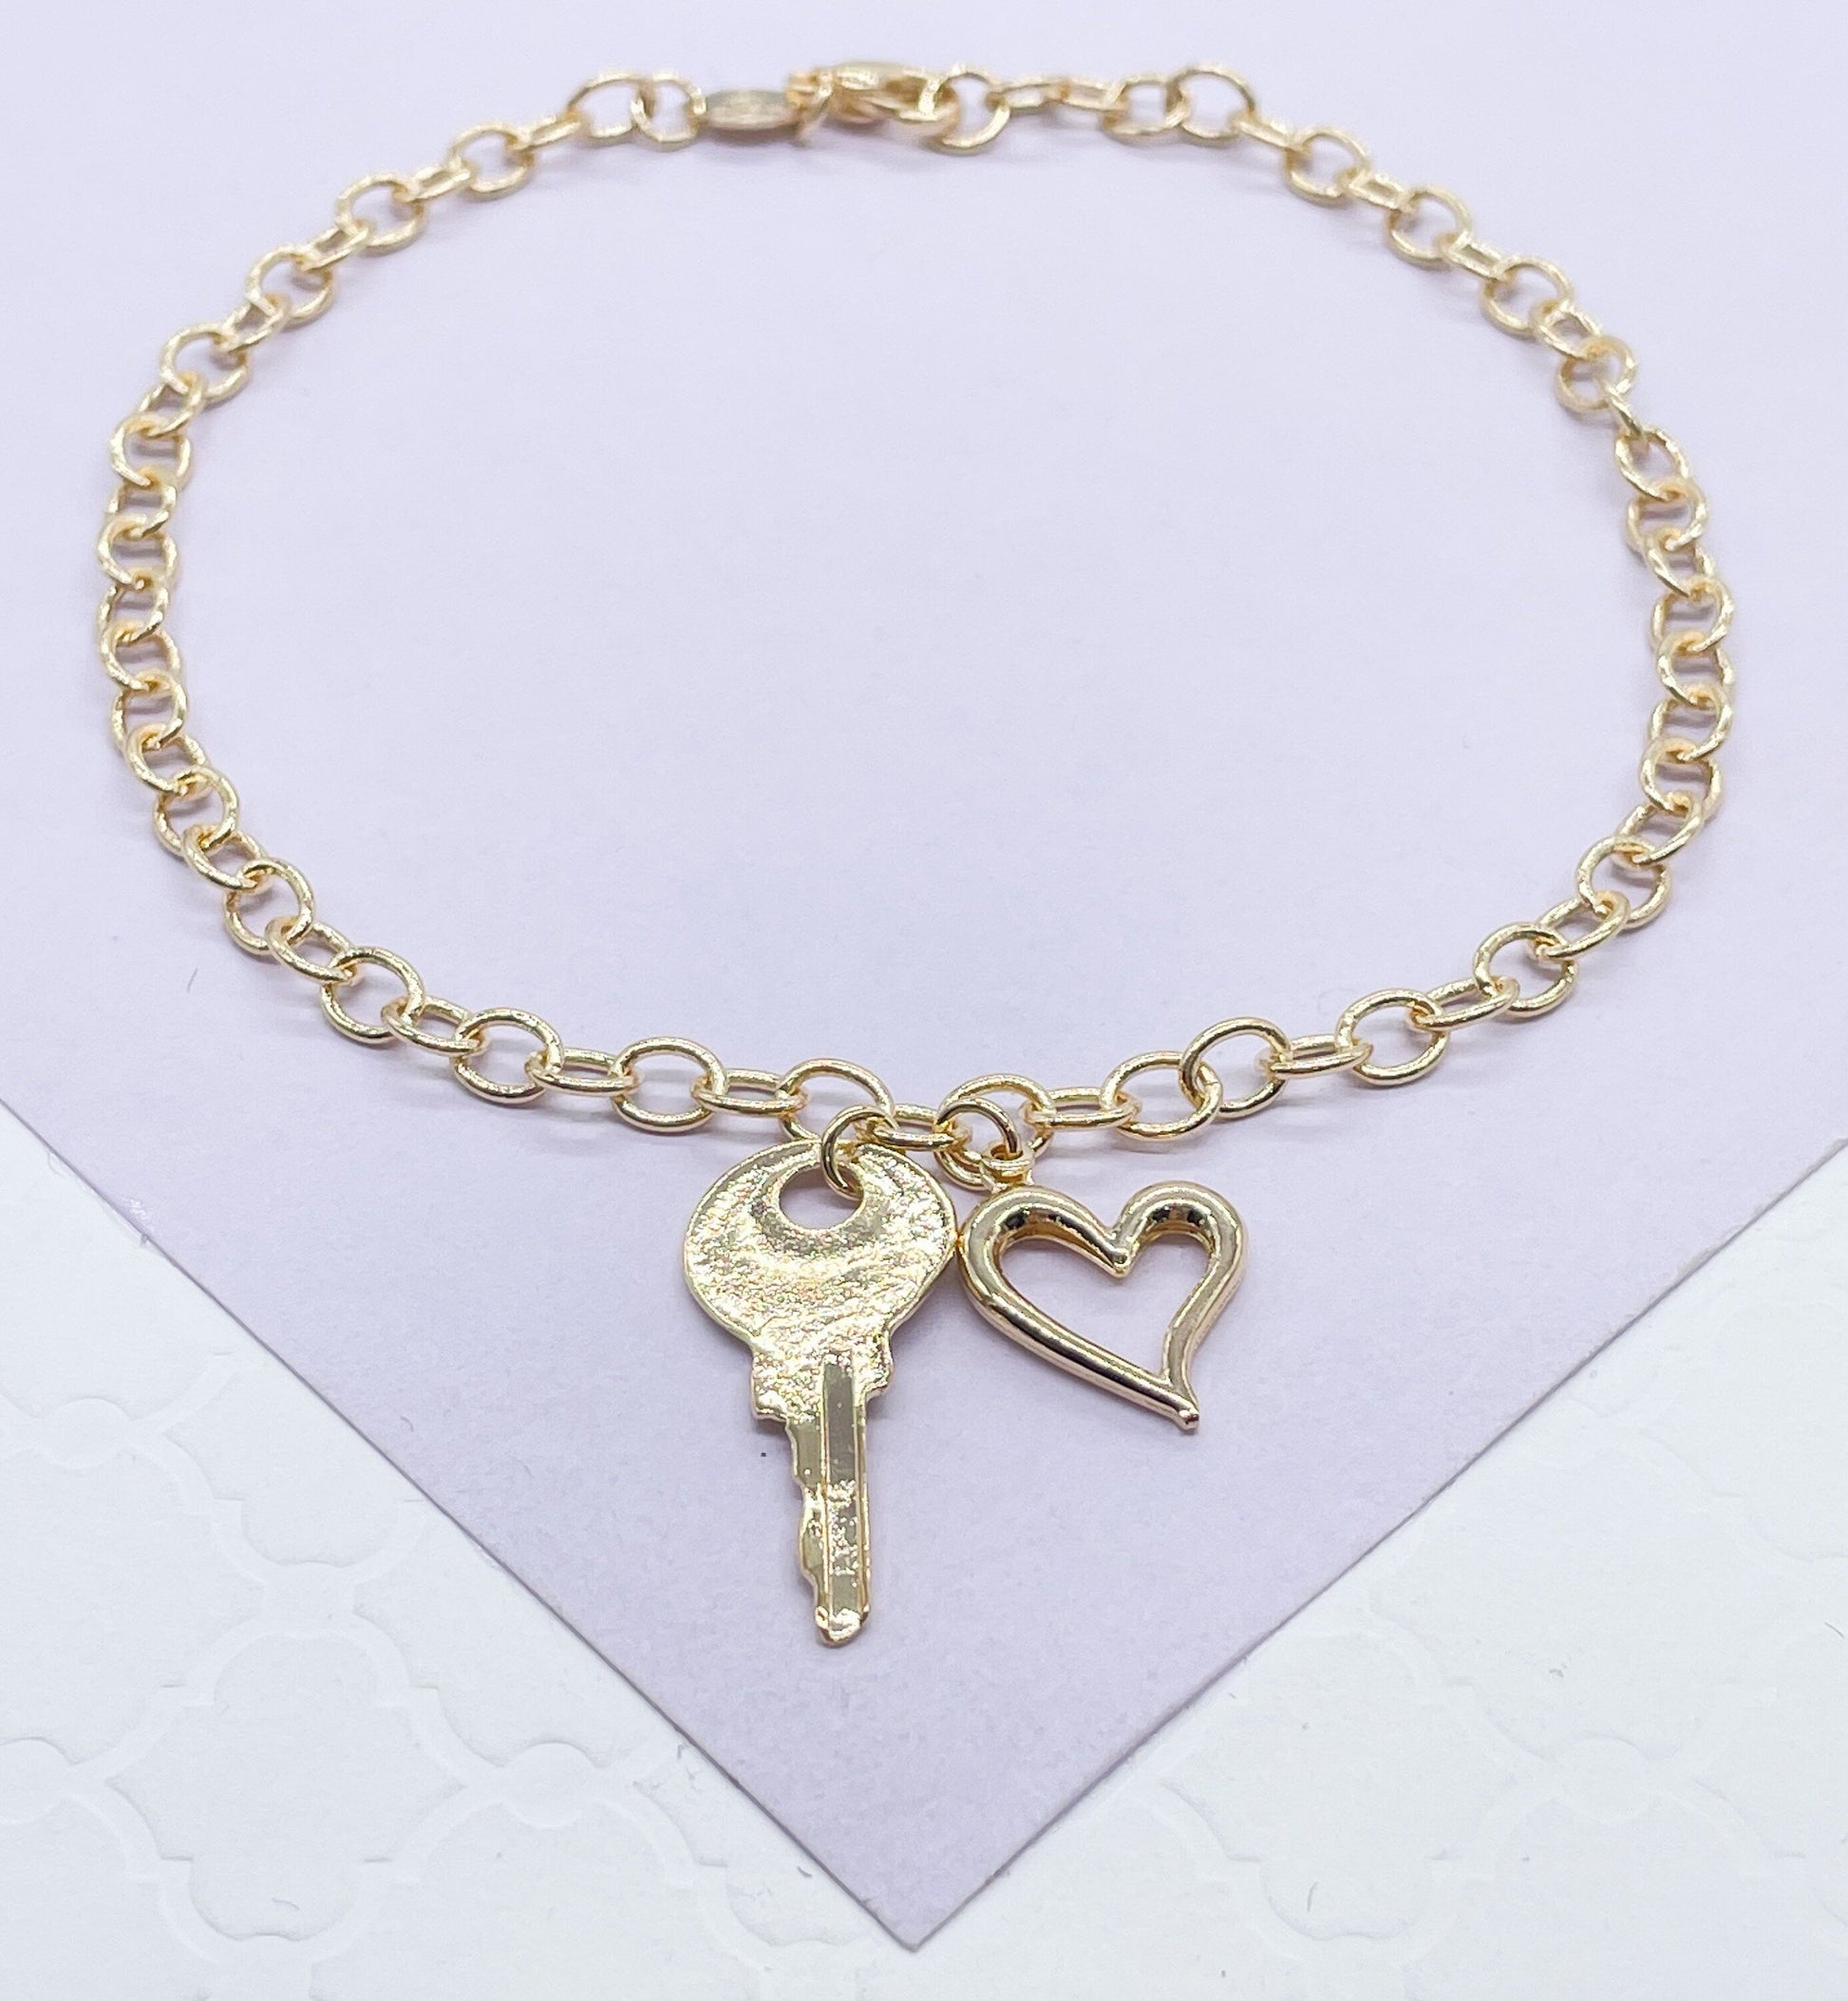 18k Gold Filled Dainty Curb Link Anklet With Heart and Key